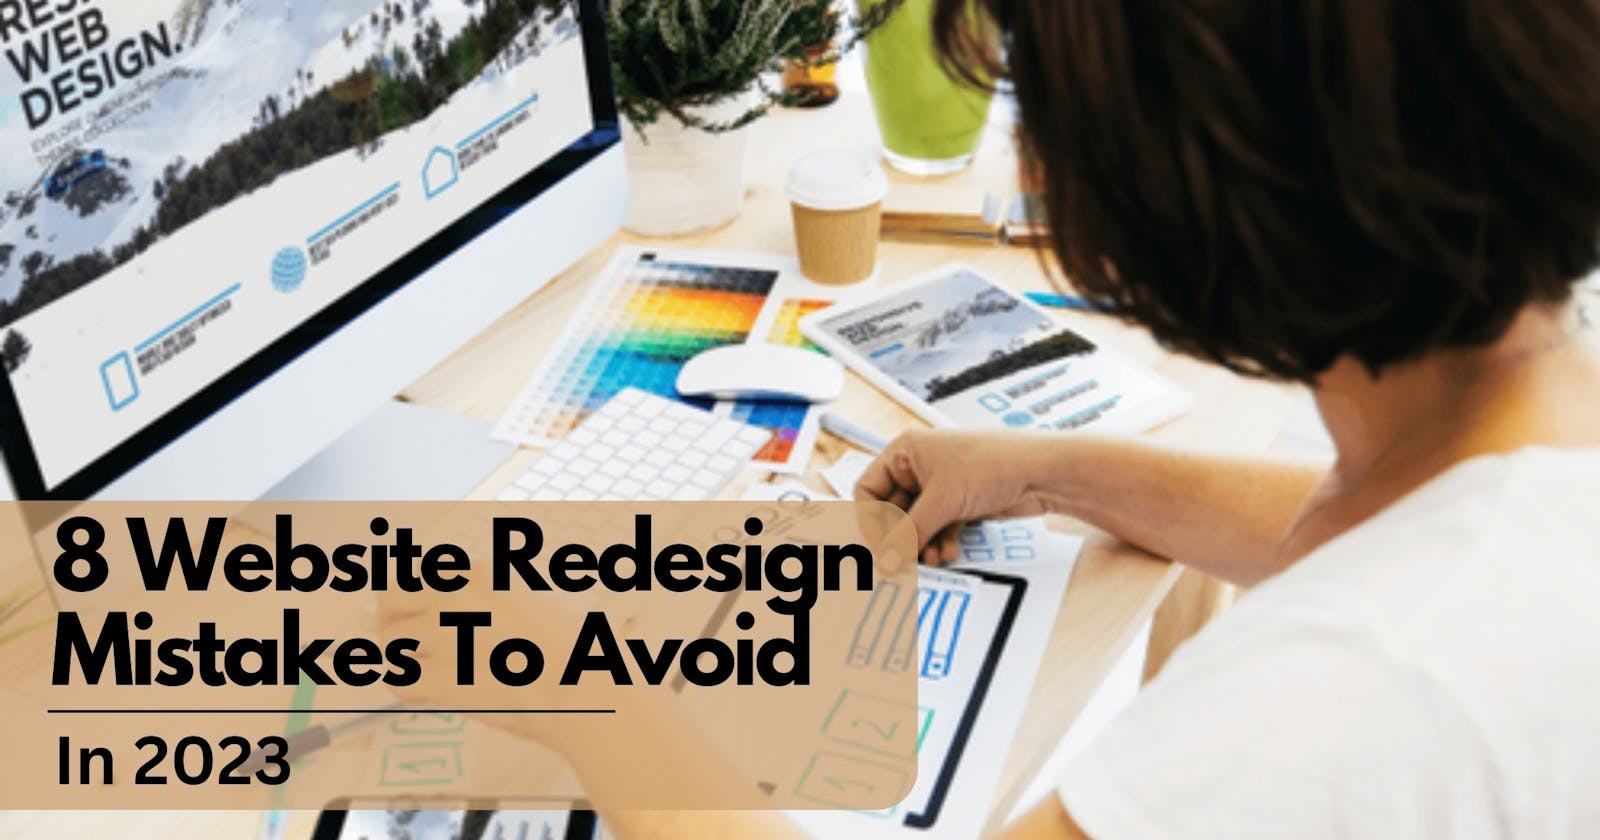 8 Website Redesign Mistakes To Avoid In 2023